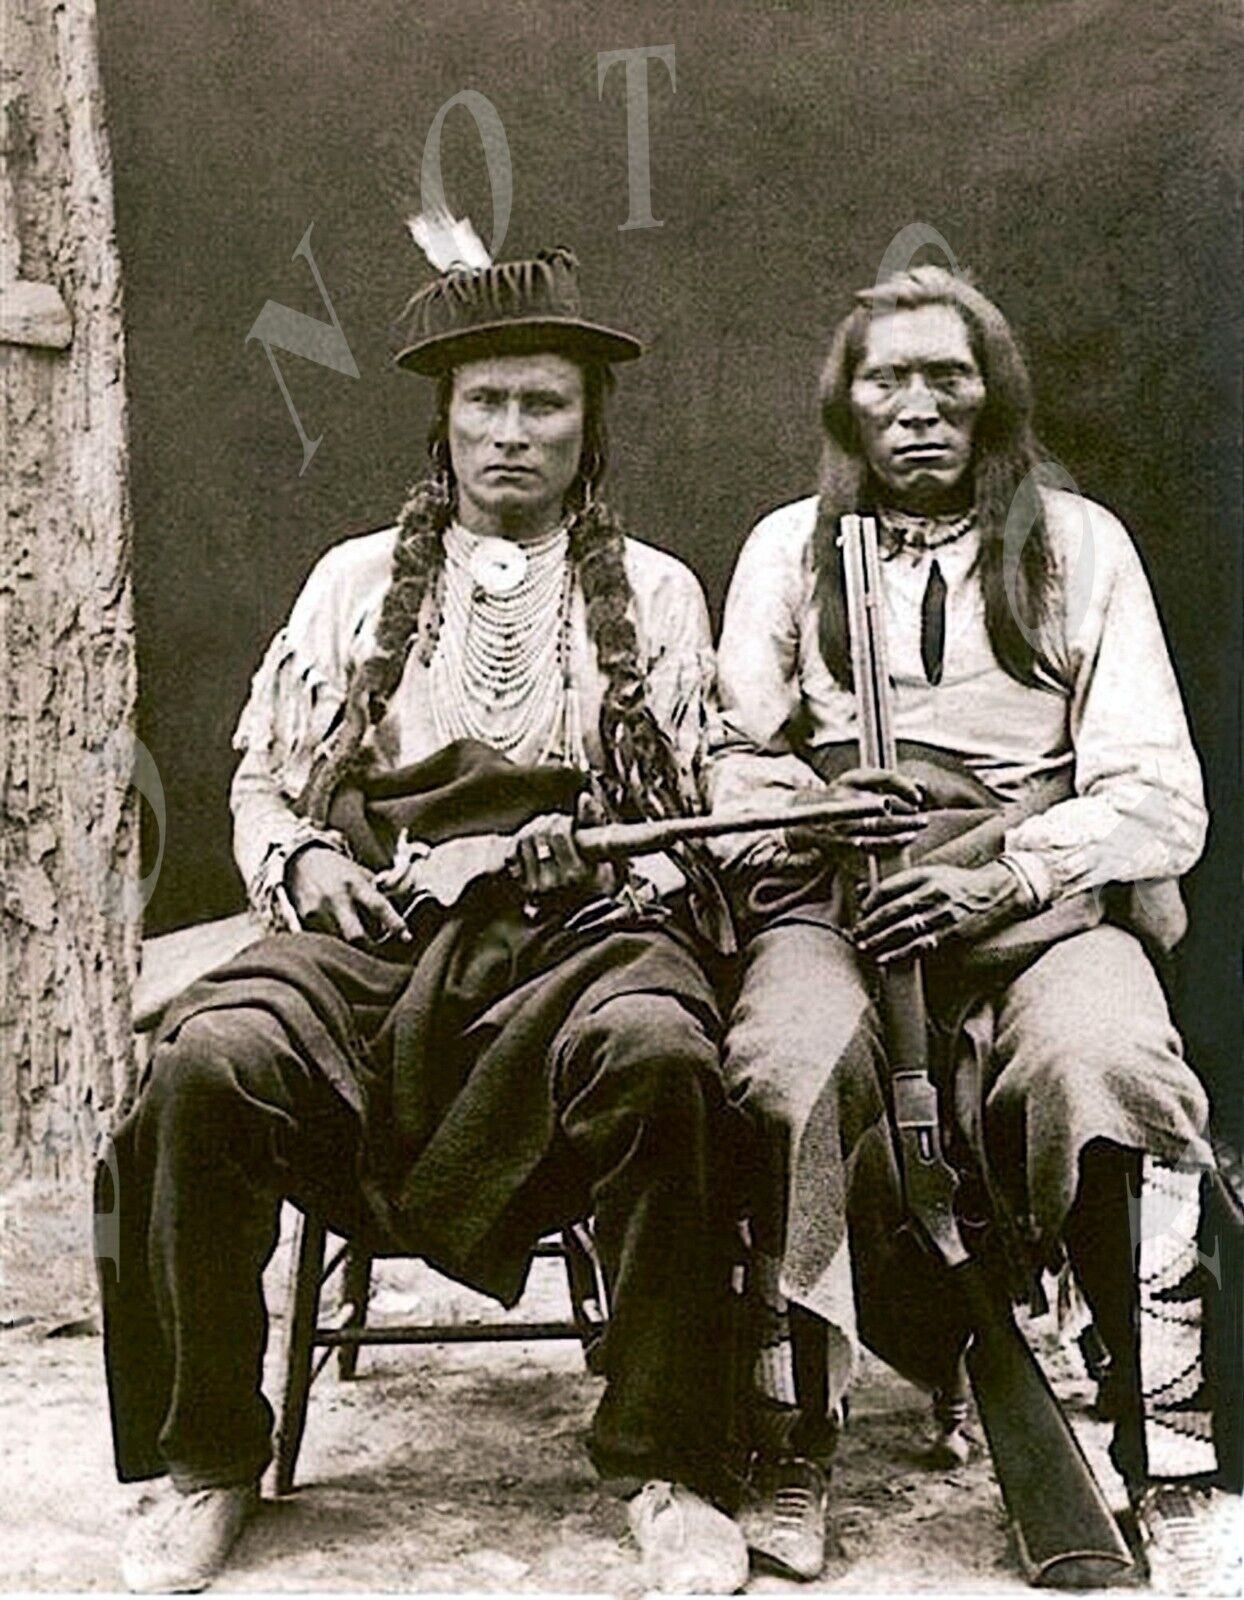 ANTIQUE REPRODUCTION 8X10 PHOTO 2 INDIANS WITH SPENCER & WINCHESTER 1873 RIFLE